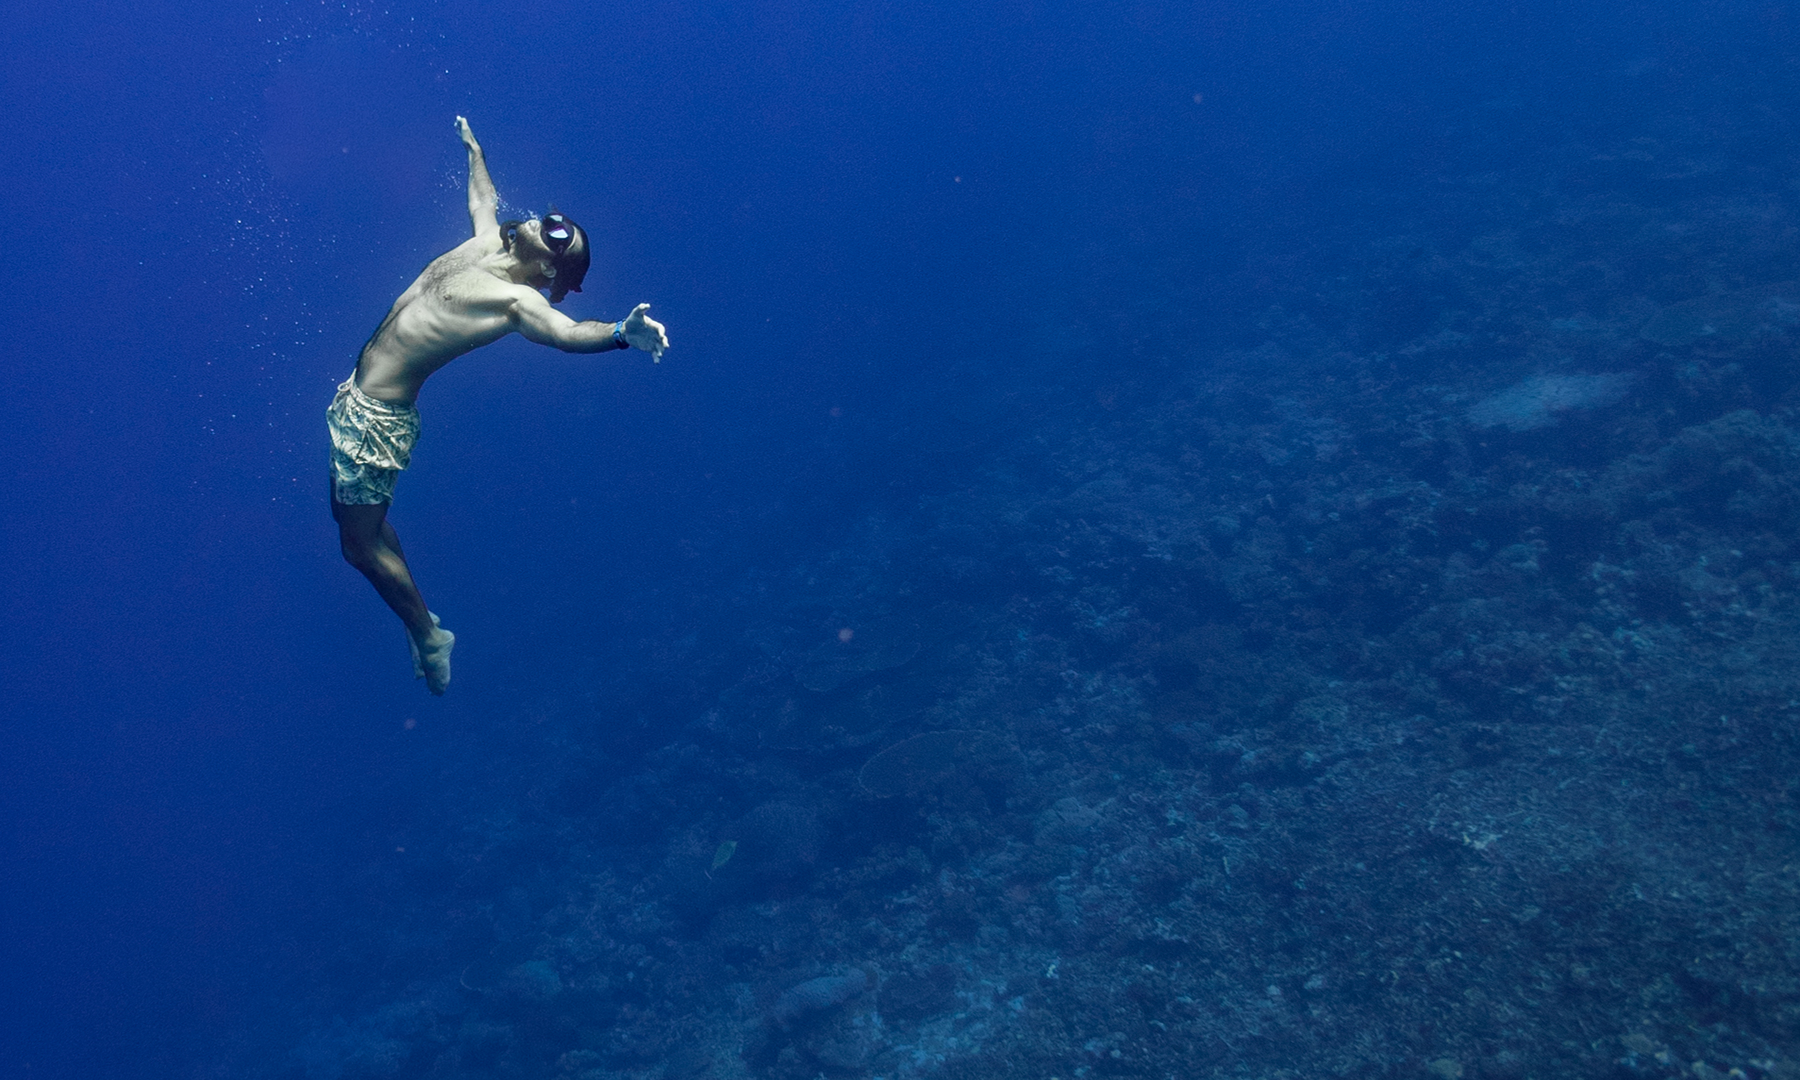 Reconnecting through Free Diving